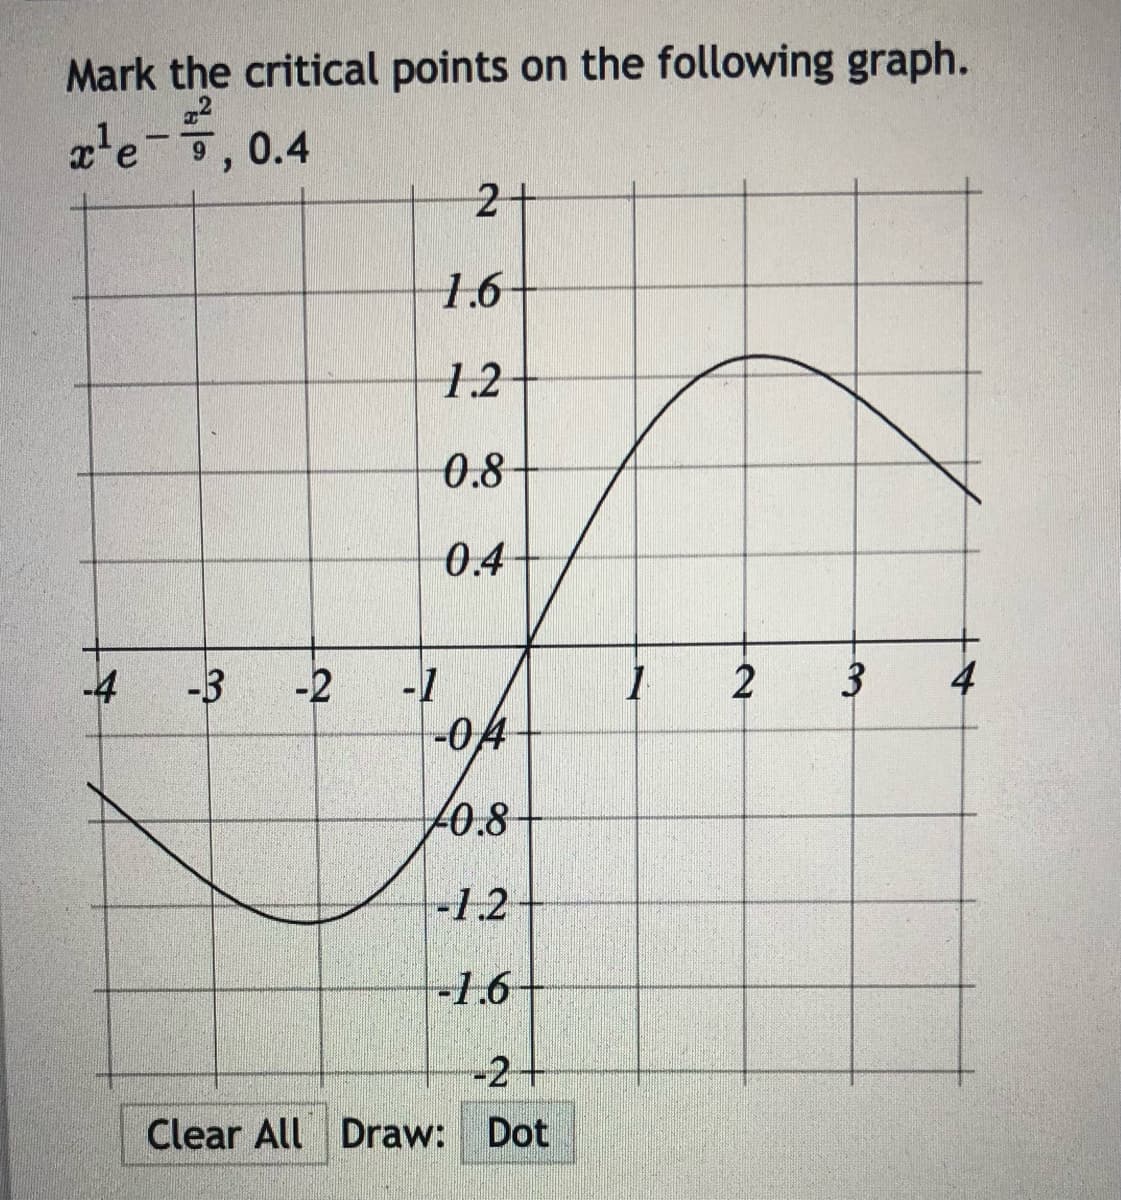 Mark the critical points on the following graph.
22
zle-ㅎ,0.4
2+
1.6
1.2
0.8
0.4
4
-1
-04
-4
-3
-2
20.8-
-1.2
-1.6
-2+
Clear All Draw:
Dot
